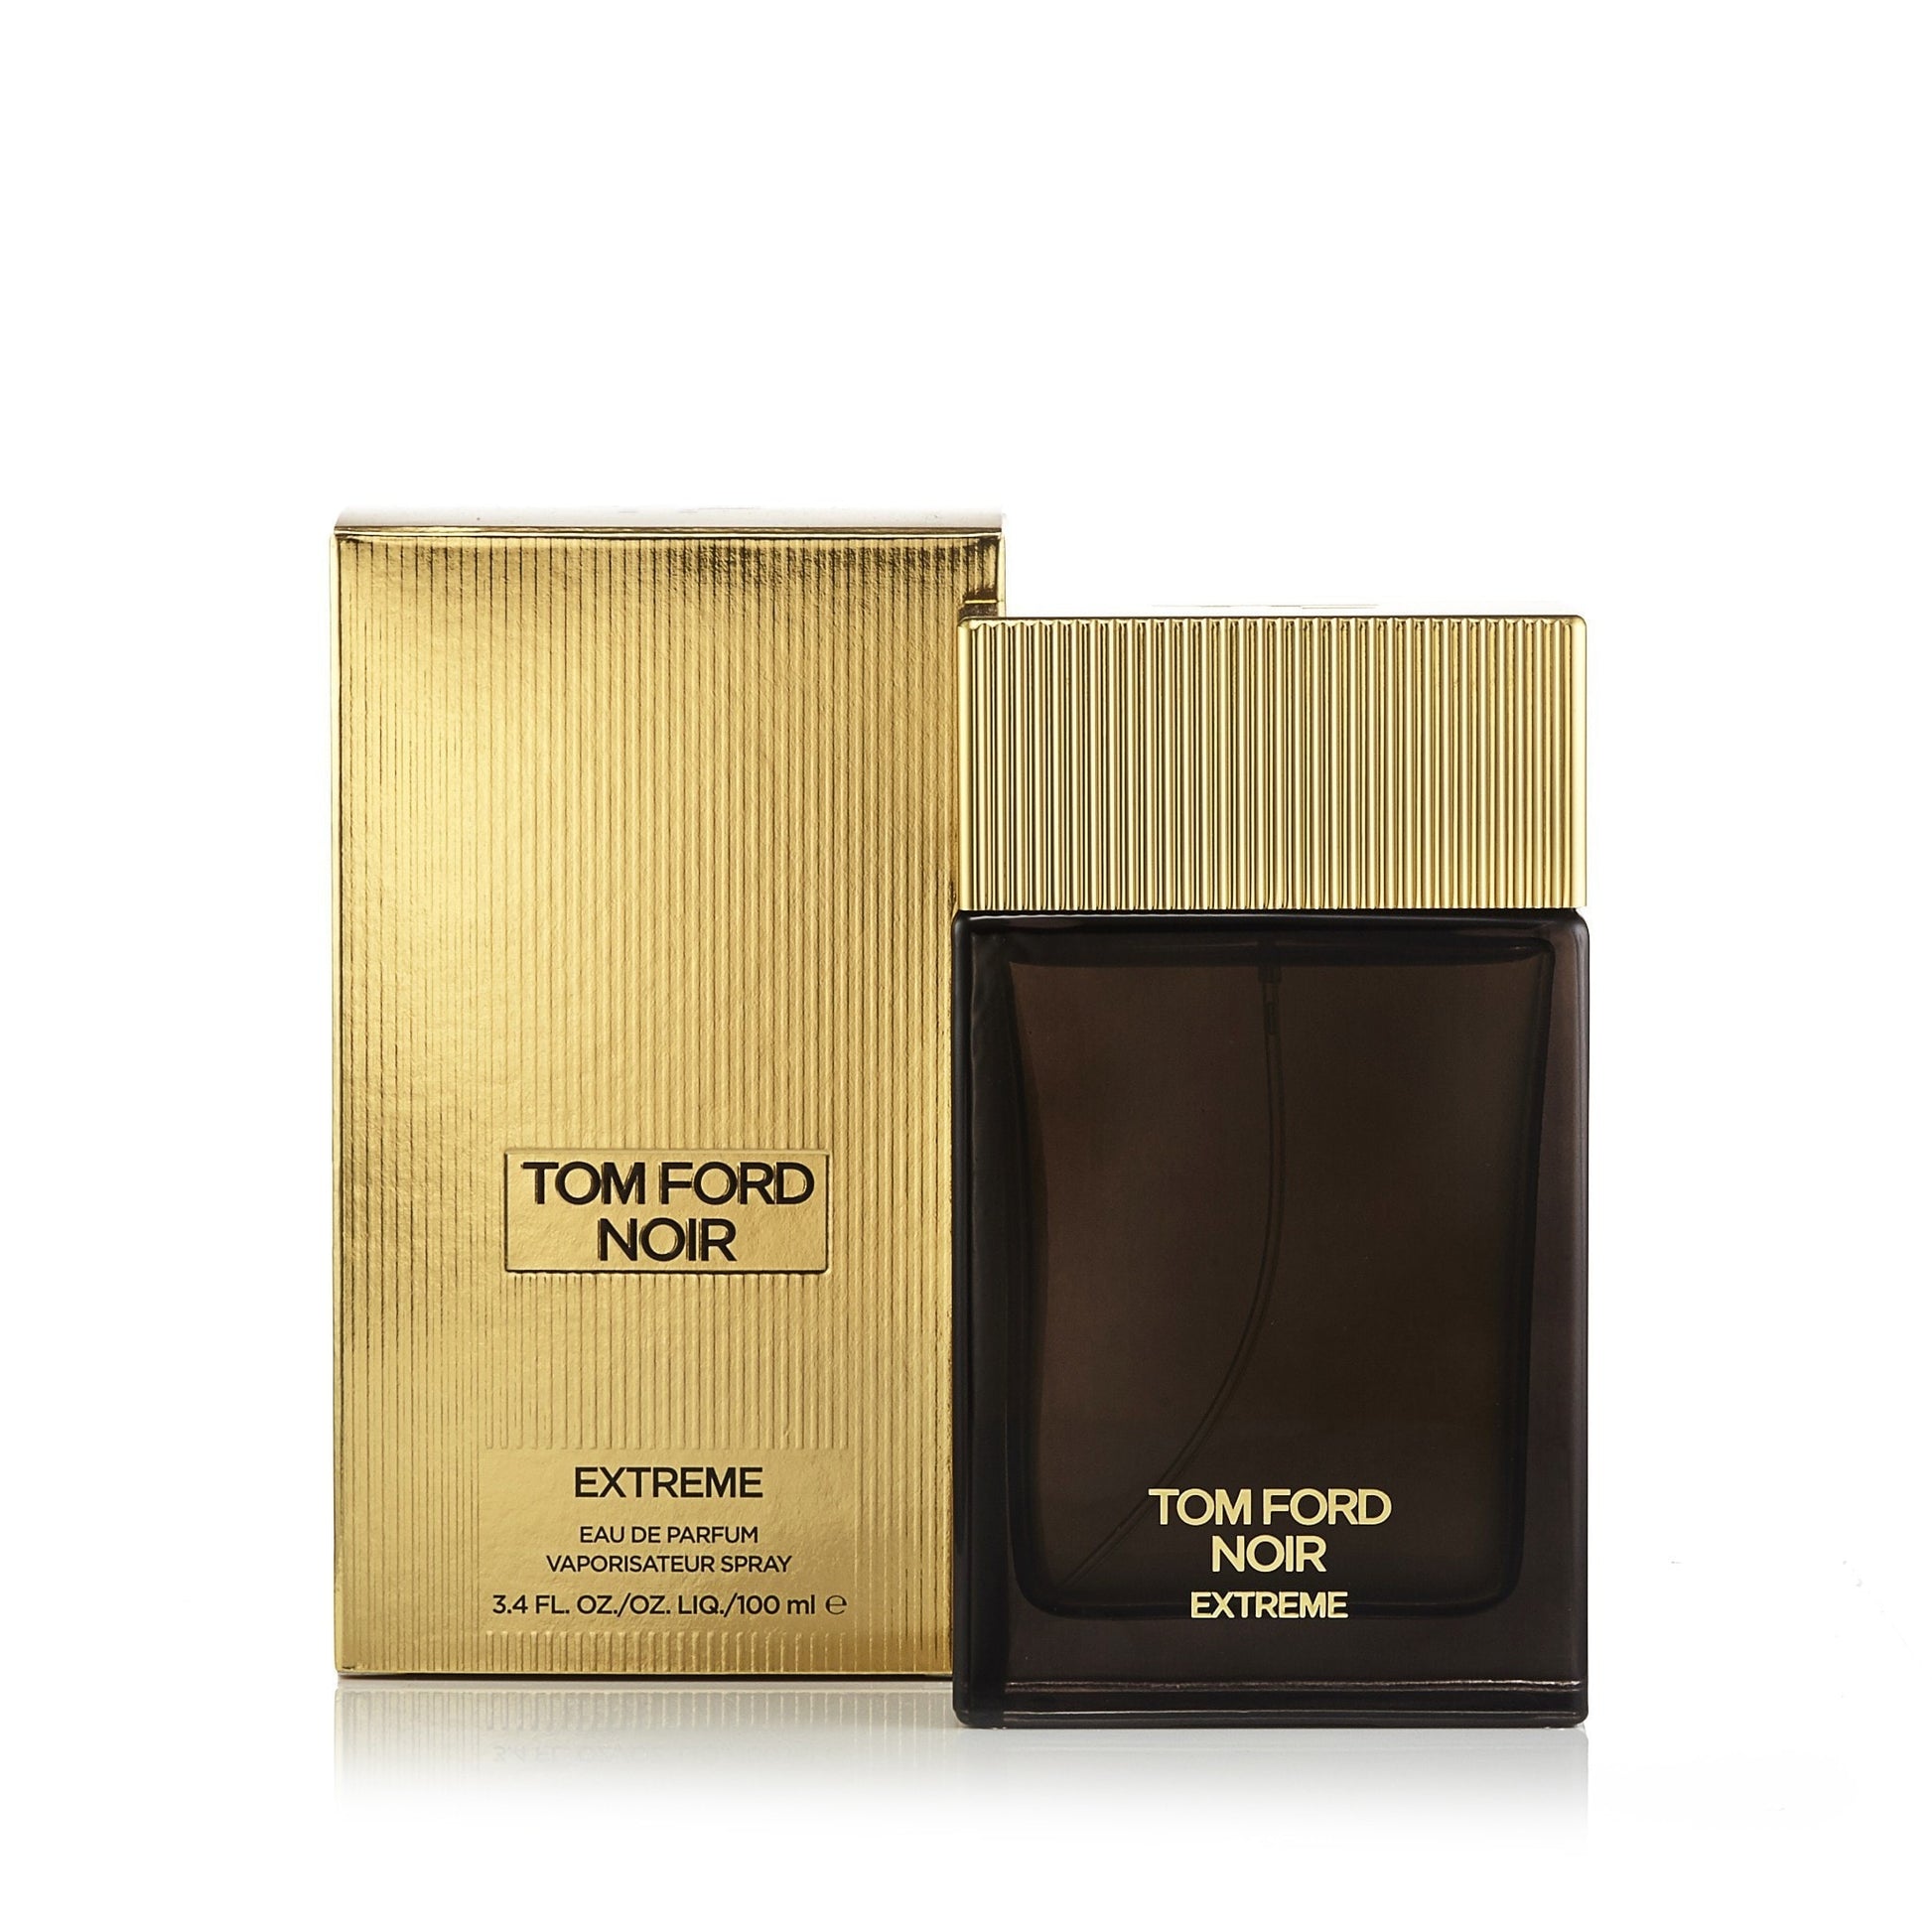 Tom Ford Noir Extreme Eau de Parfum Spray for Men by Tom Ford 3.4 oz. Click to open in modal